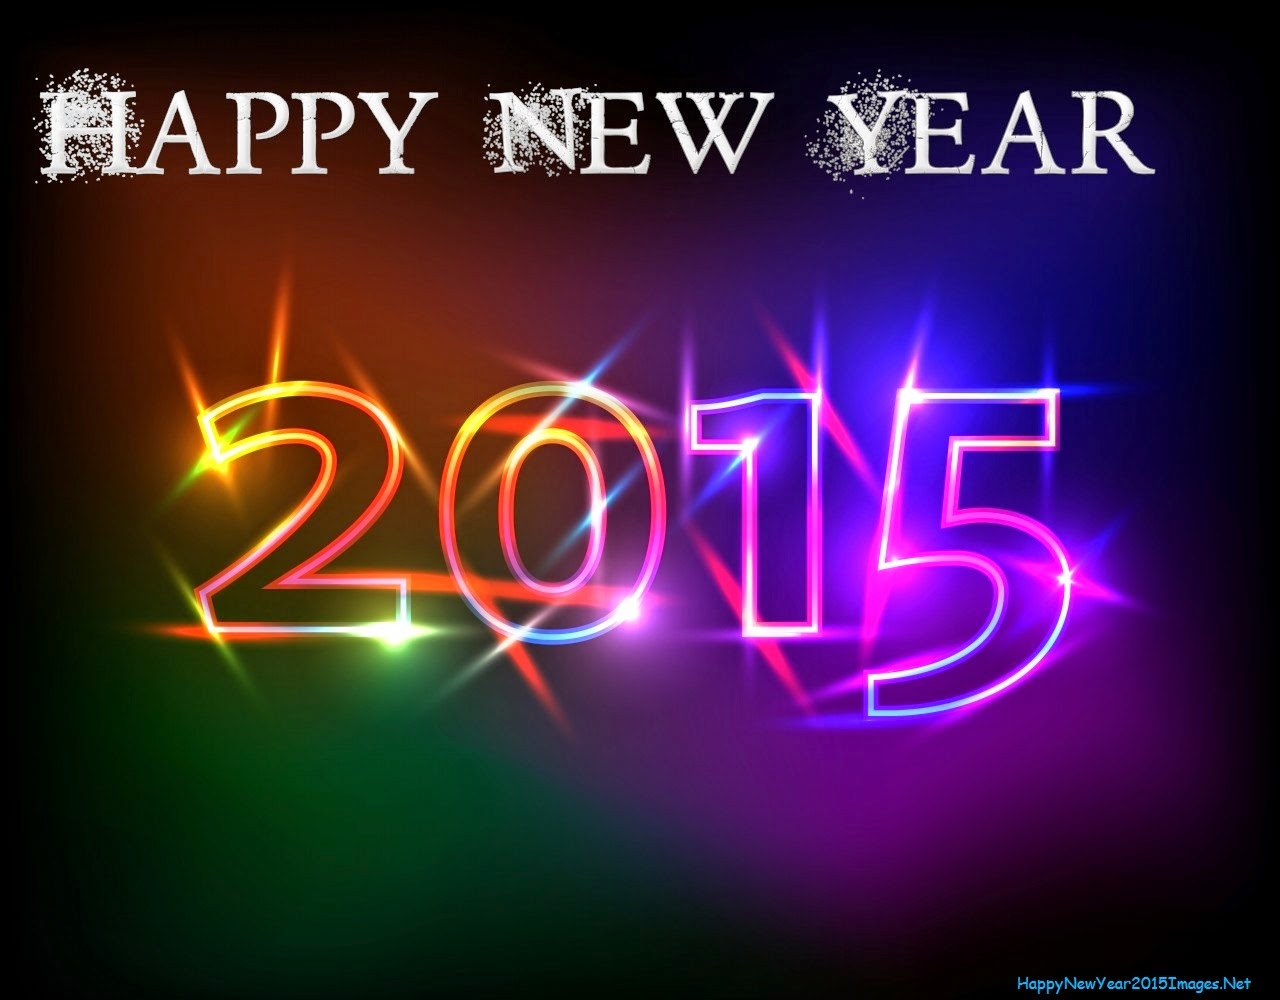  Pictures of Happy New Year 2015 - Happy New Year 2015 Photos - Happy New Year 2015 Backgrounds Happy+New+Year+2015+Hot+Colors+On+Black+Backgrounds